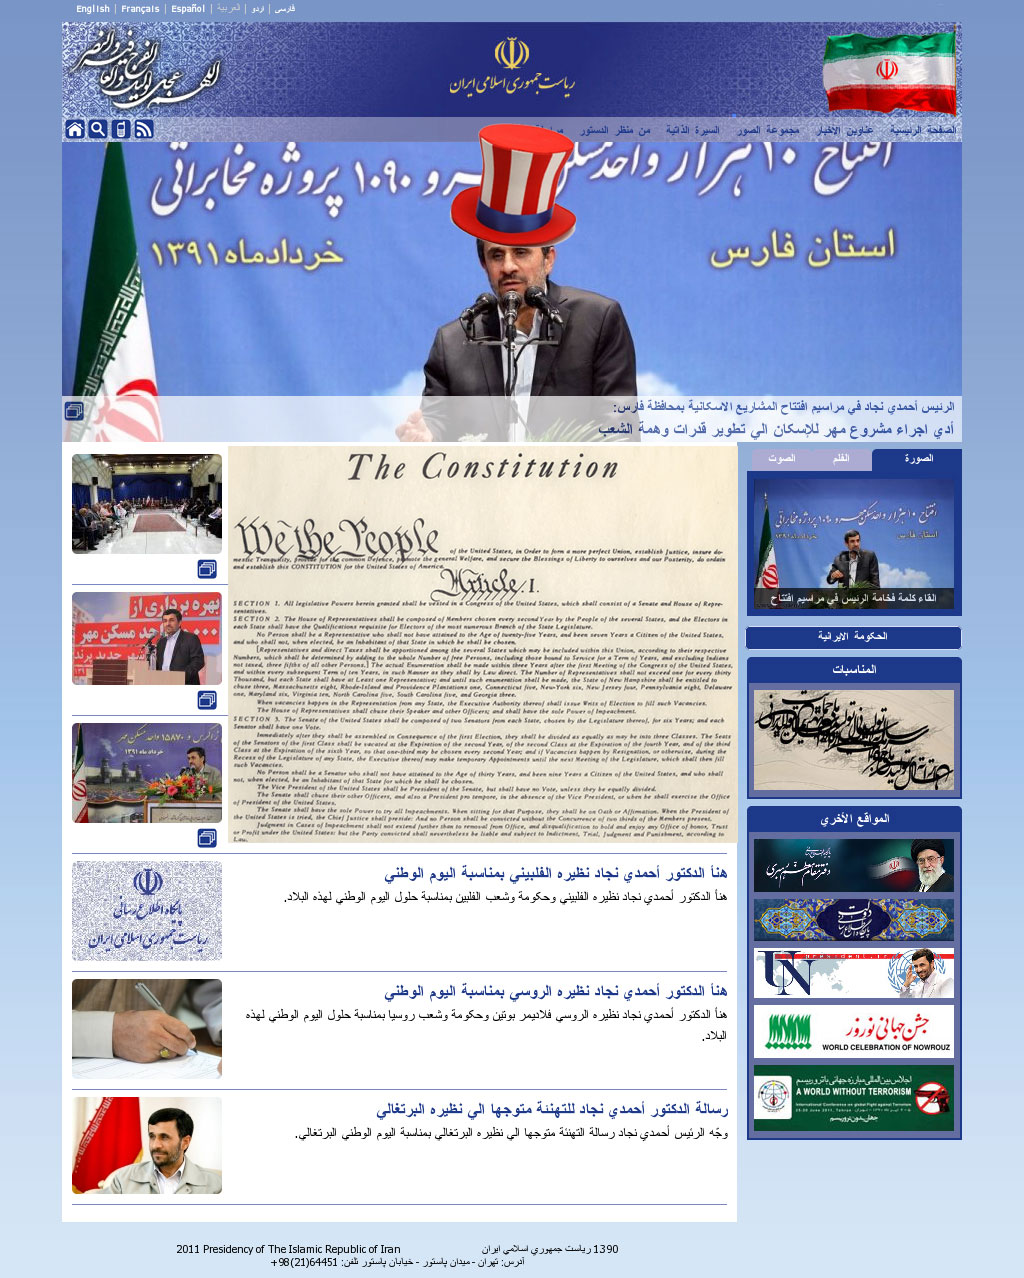 Hacked and defaced official website of Iran